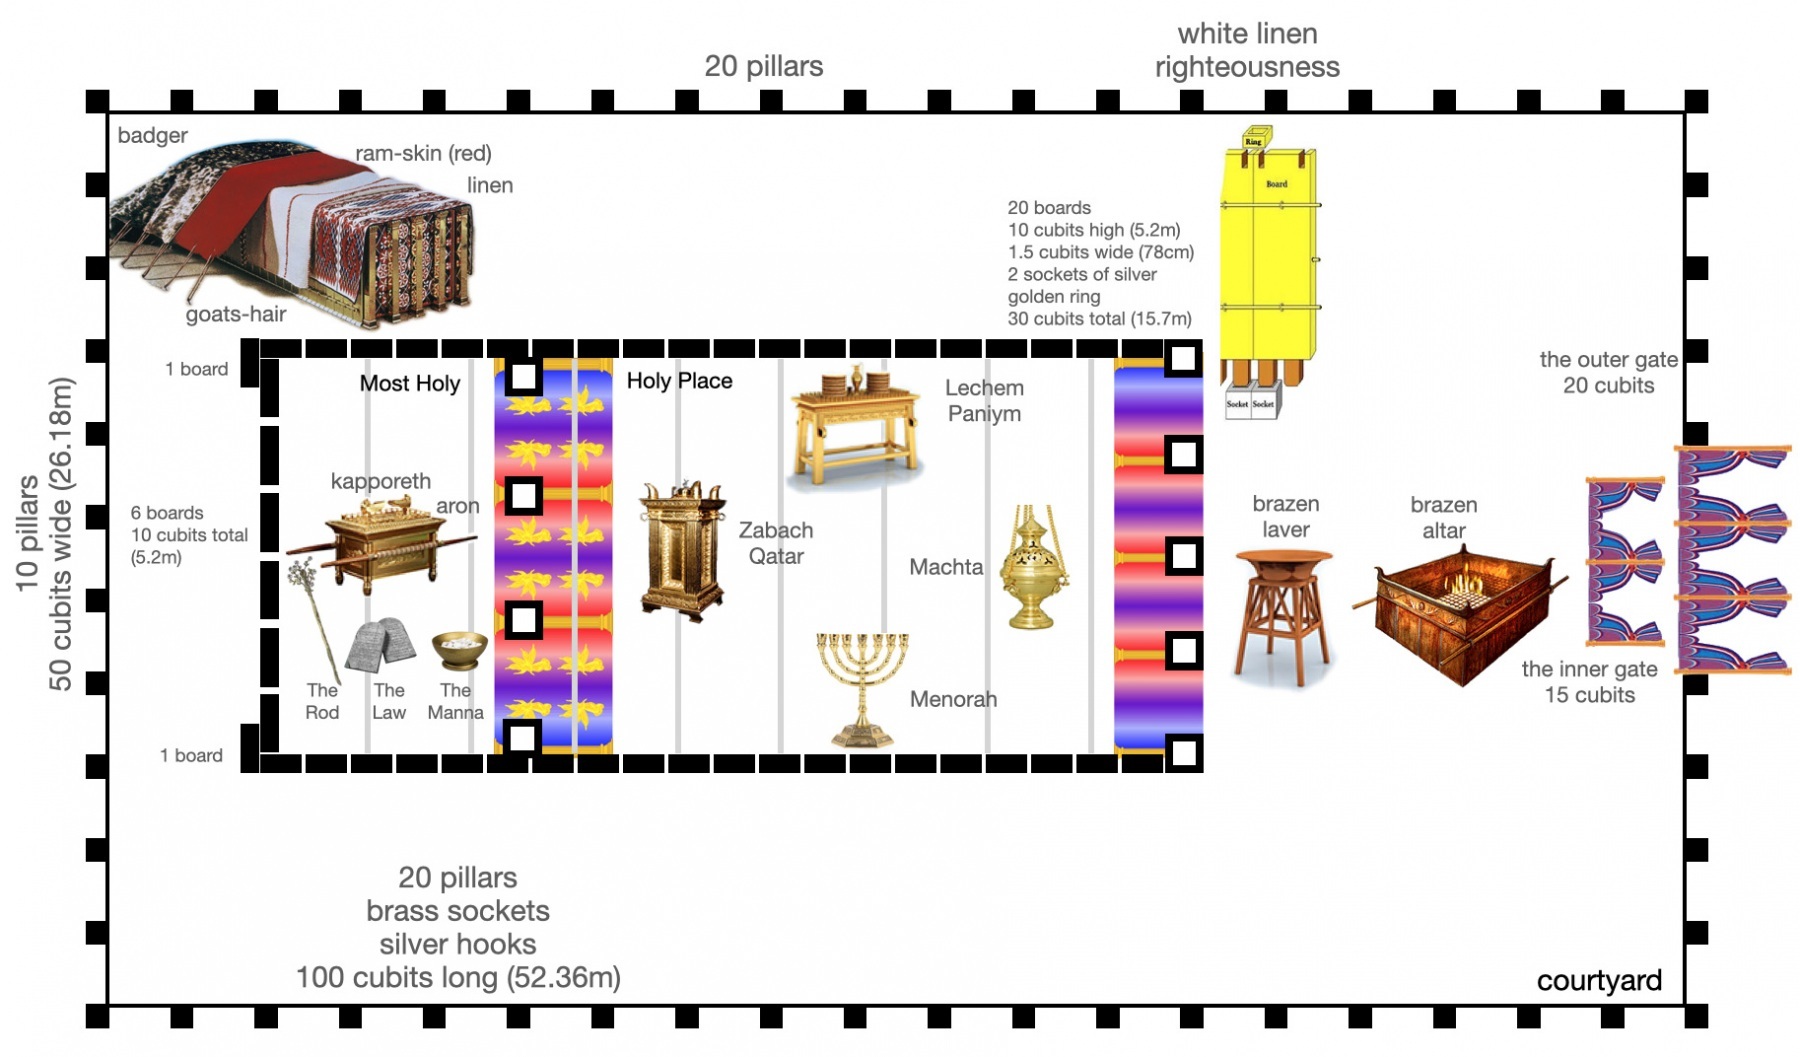 tabernacle_overview